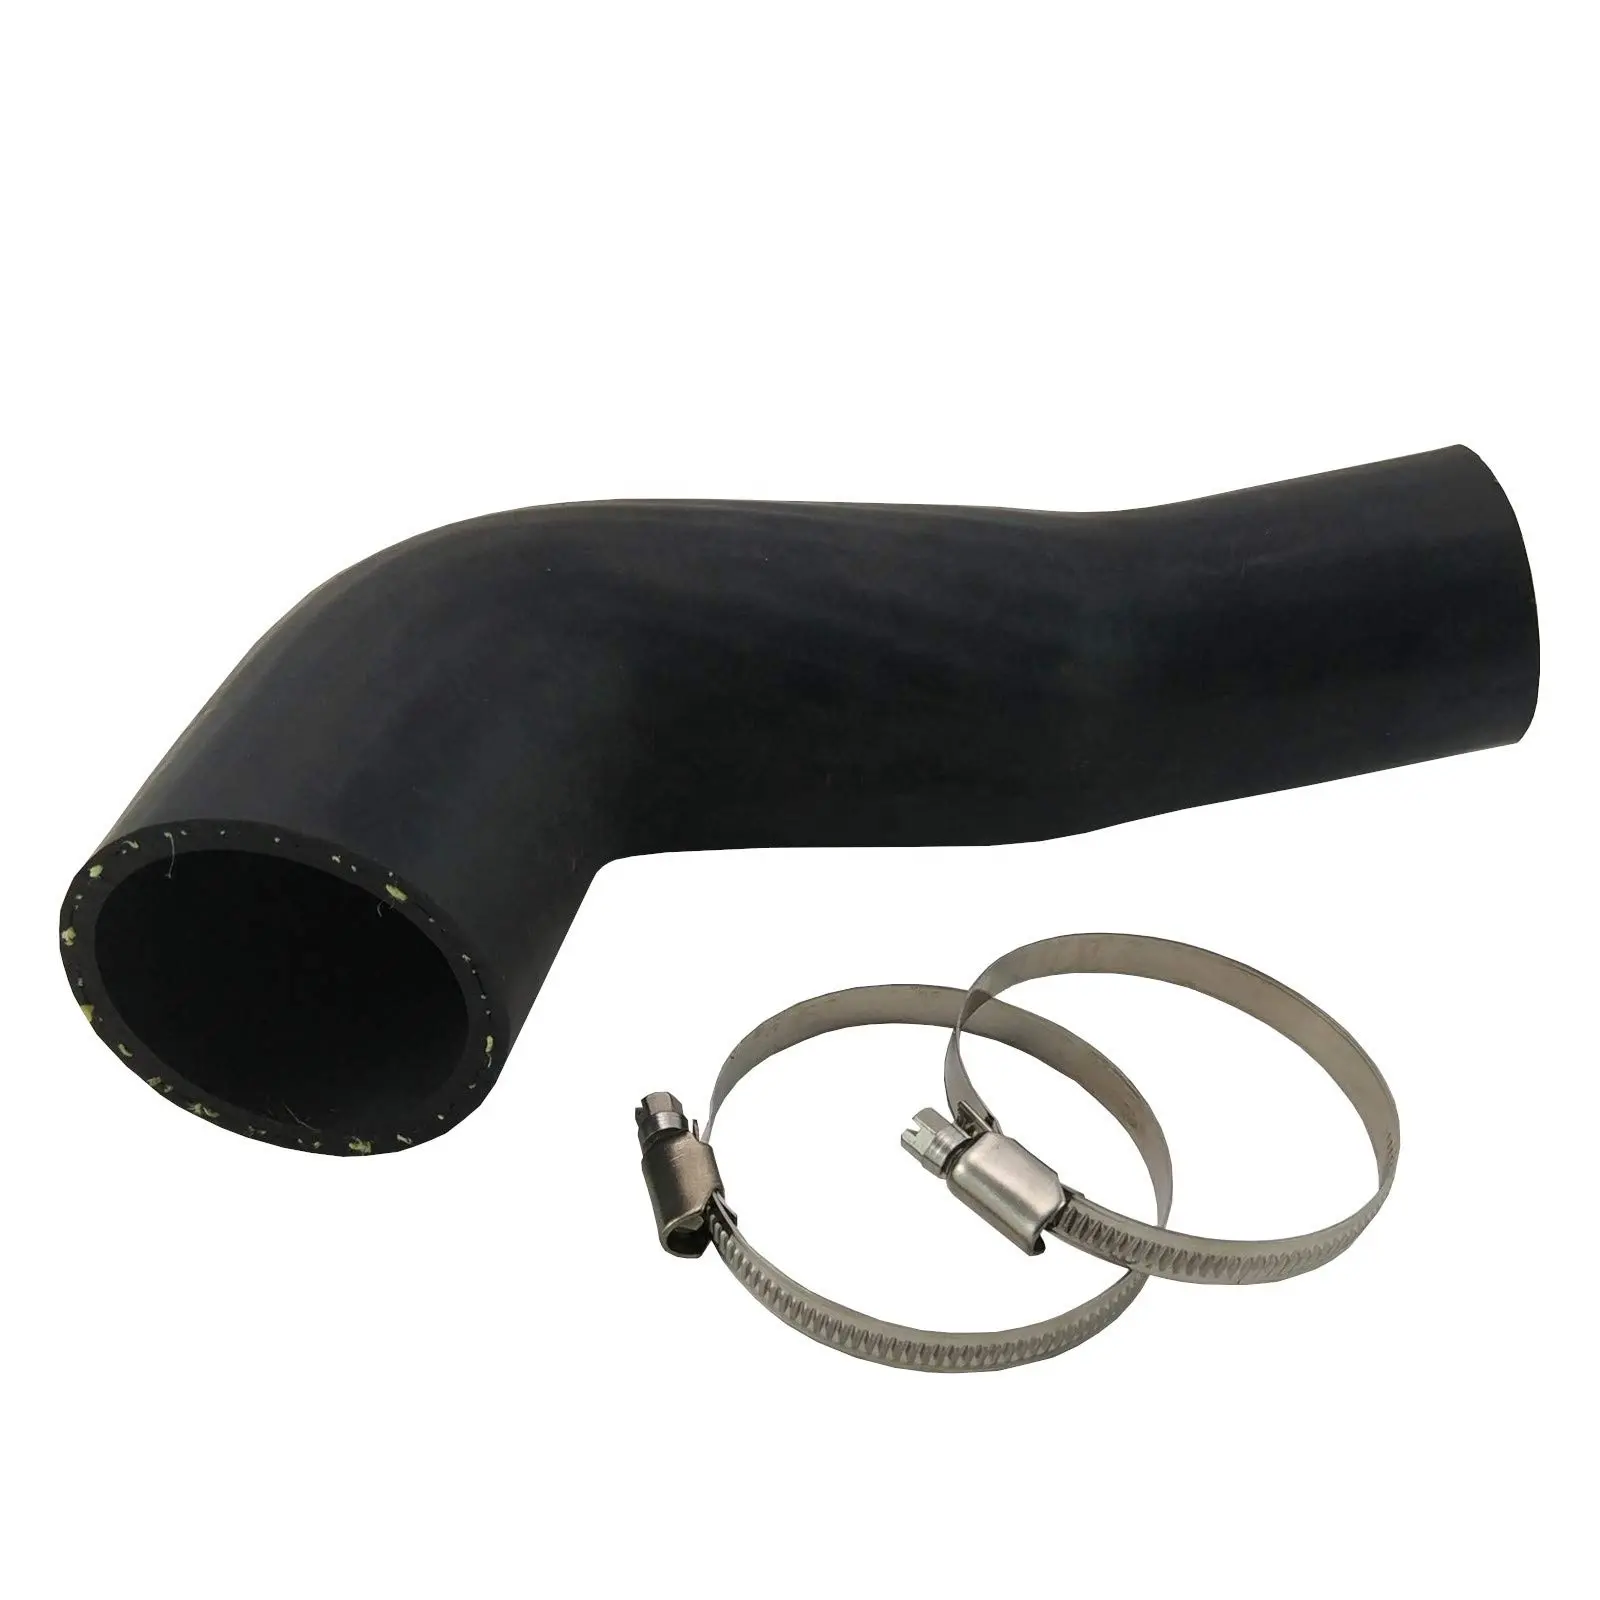 Car Intercooler Charge Air Intake Hose Pipe for Volvo S60 30740896 30740895 30741452 30794890